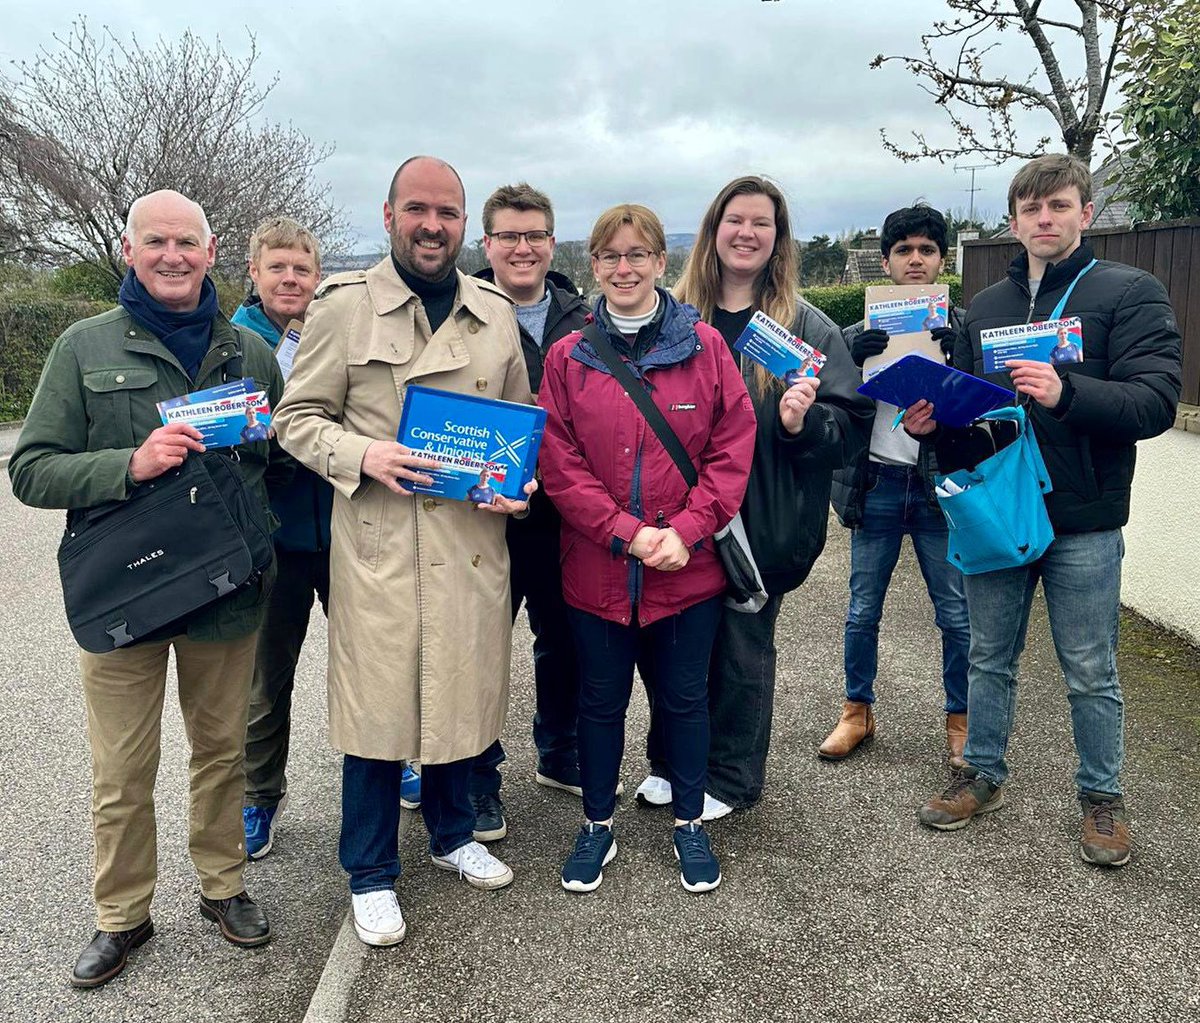 Great to welcome @RicHolden to Moray yesterday. Joined by Cllr Kathleen Robertson, candidate for Moray West, Nairn and Strathspey and @TimEagleHI. We enjoyed meeting residents and joining locals in celebrating the commitment to reopen the Cloddach Bridge.